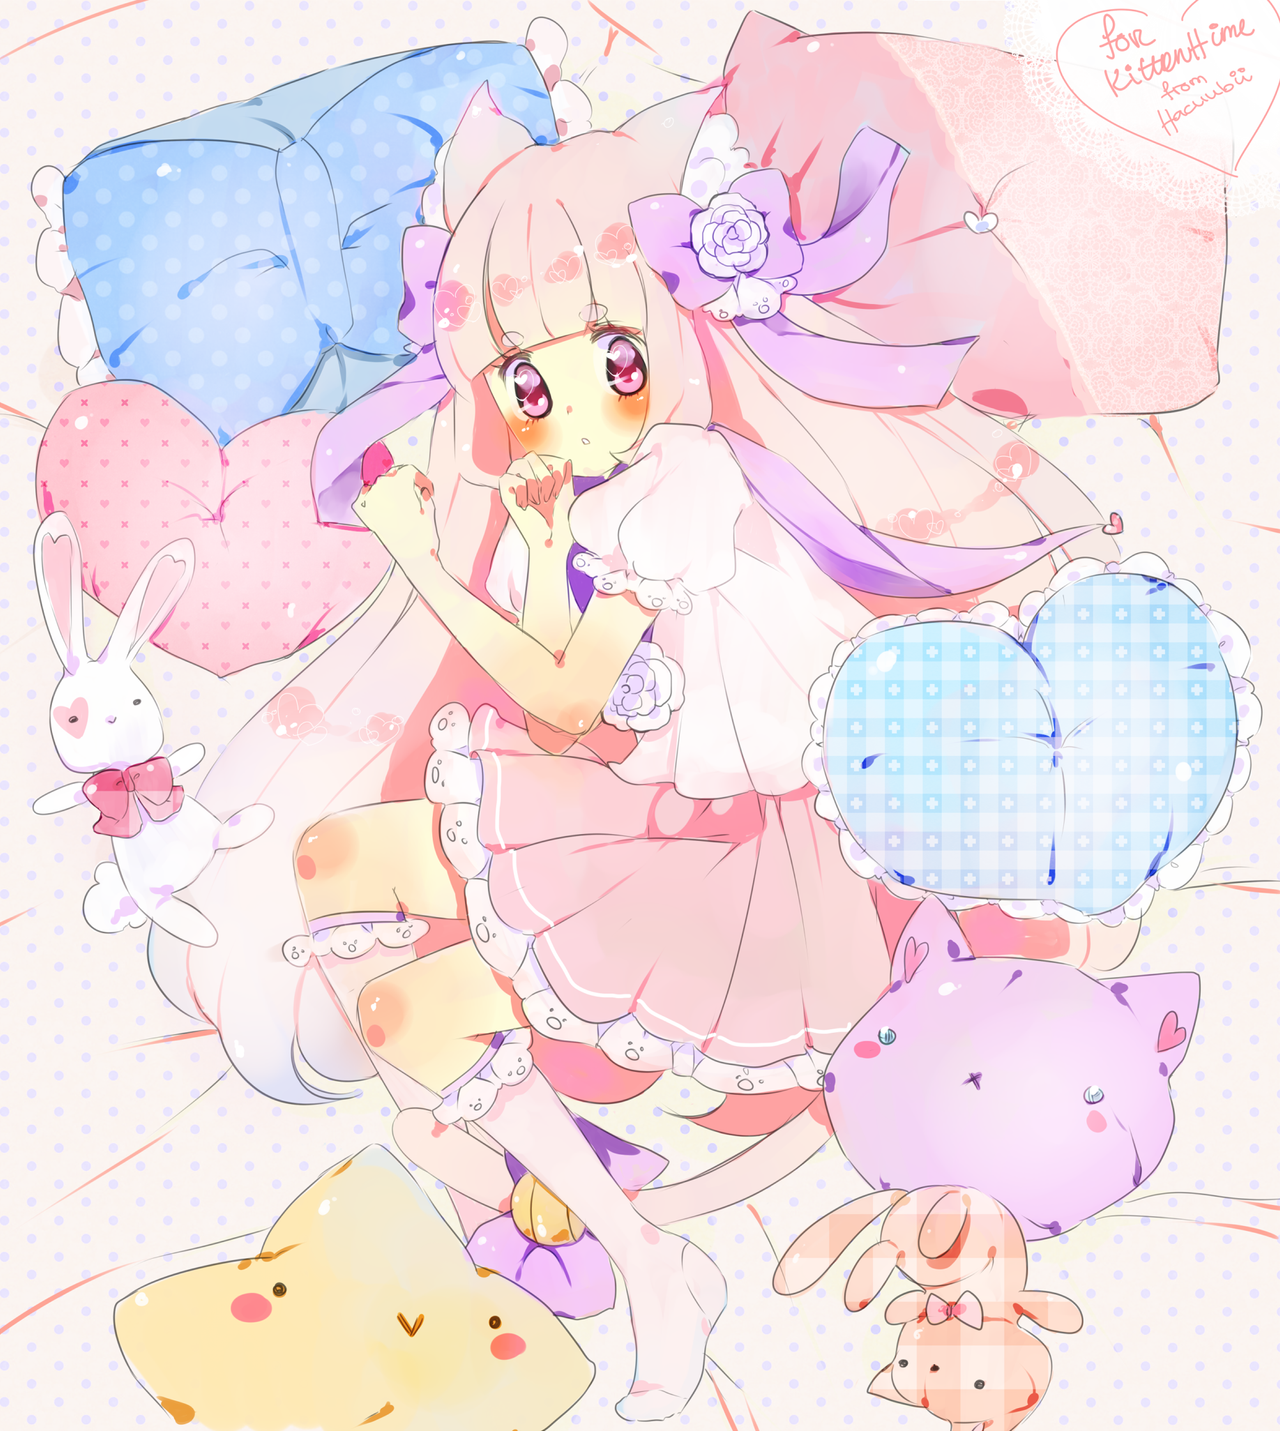 CONTEST ENTRY: KittenHime by Hacuubii on DeviantArt